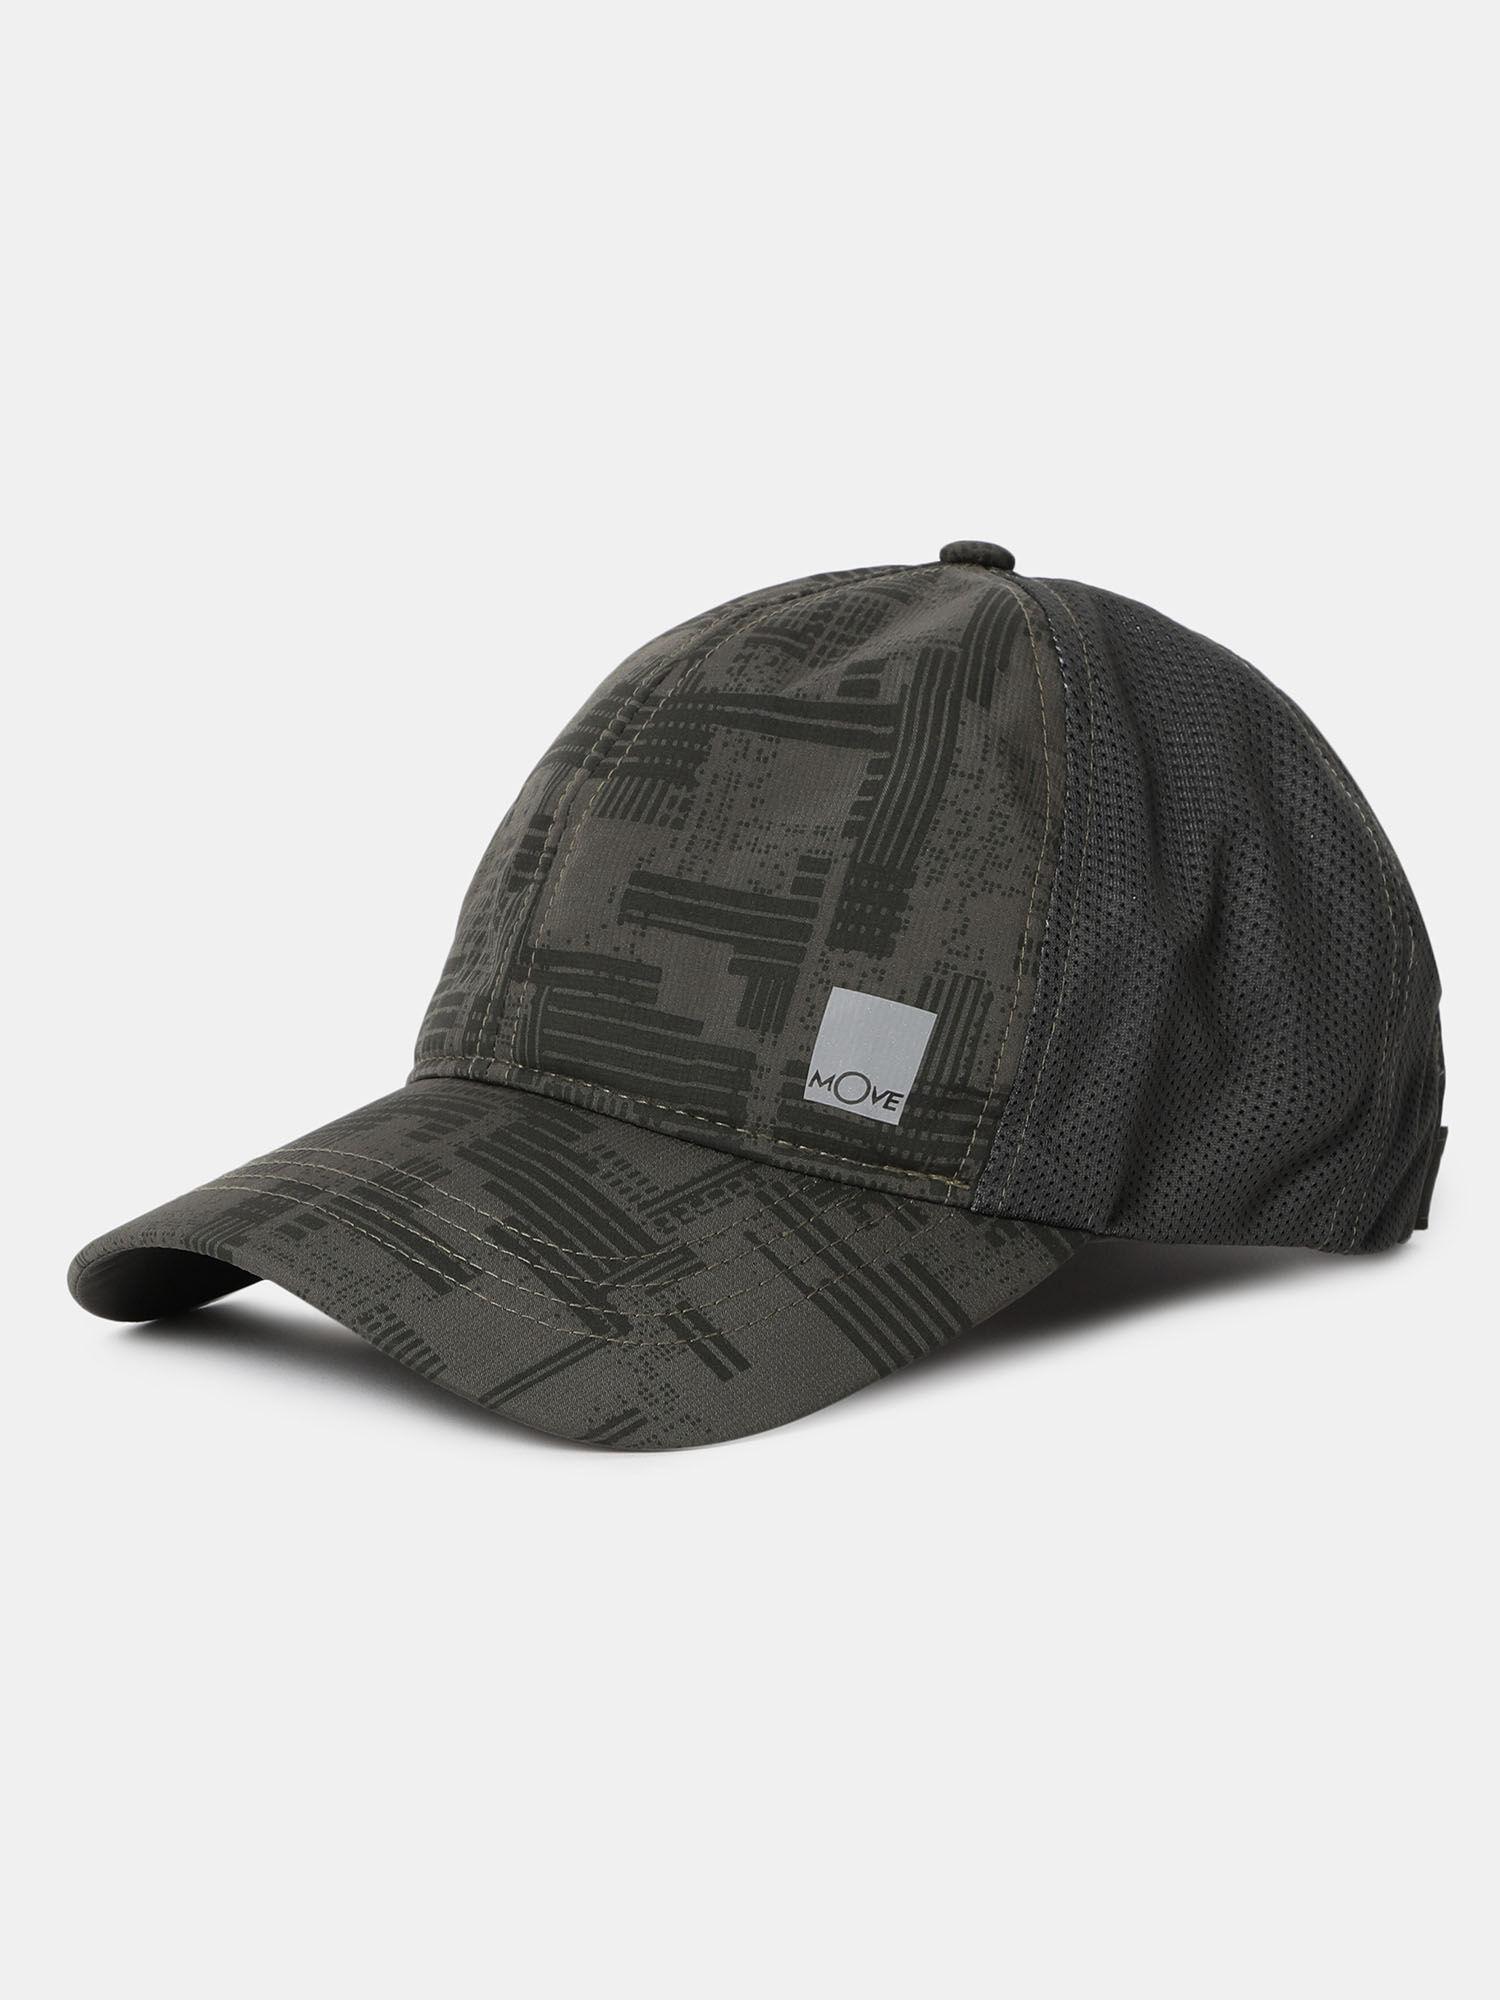 cp23-polyester-printed-cap-with-adjustable-back-closure-and-stay-dry-deep-charcoal